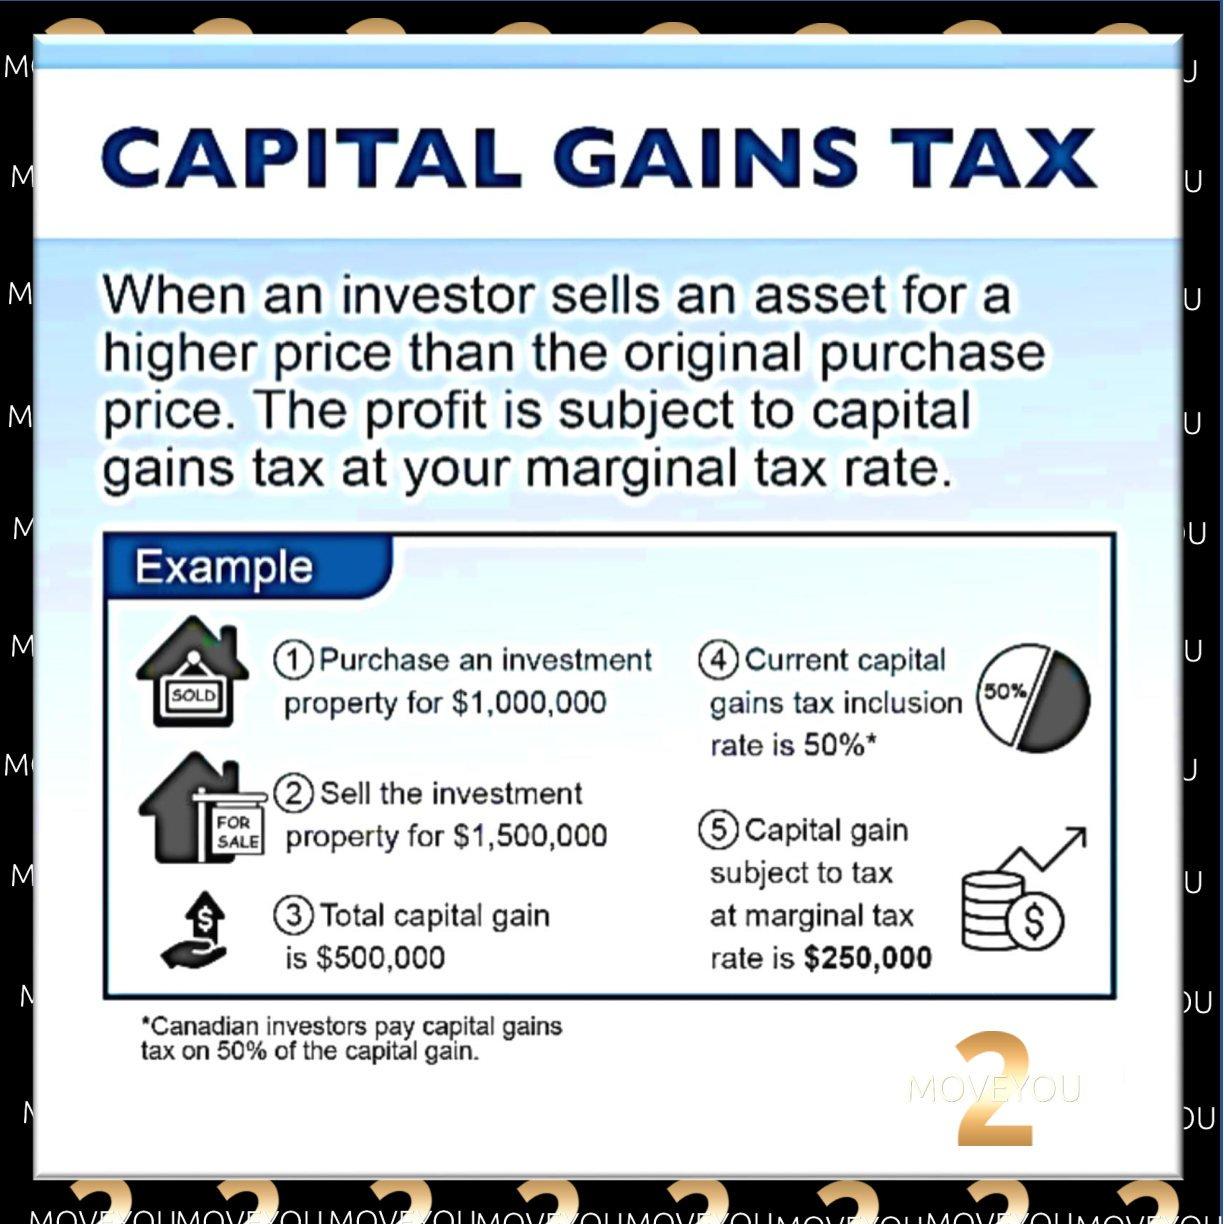 How much is the capital gains tax on real estate